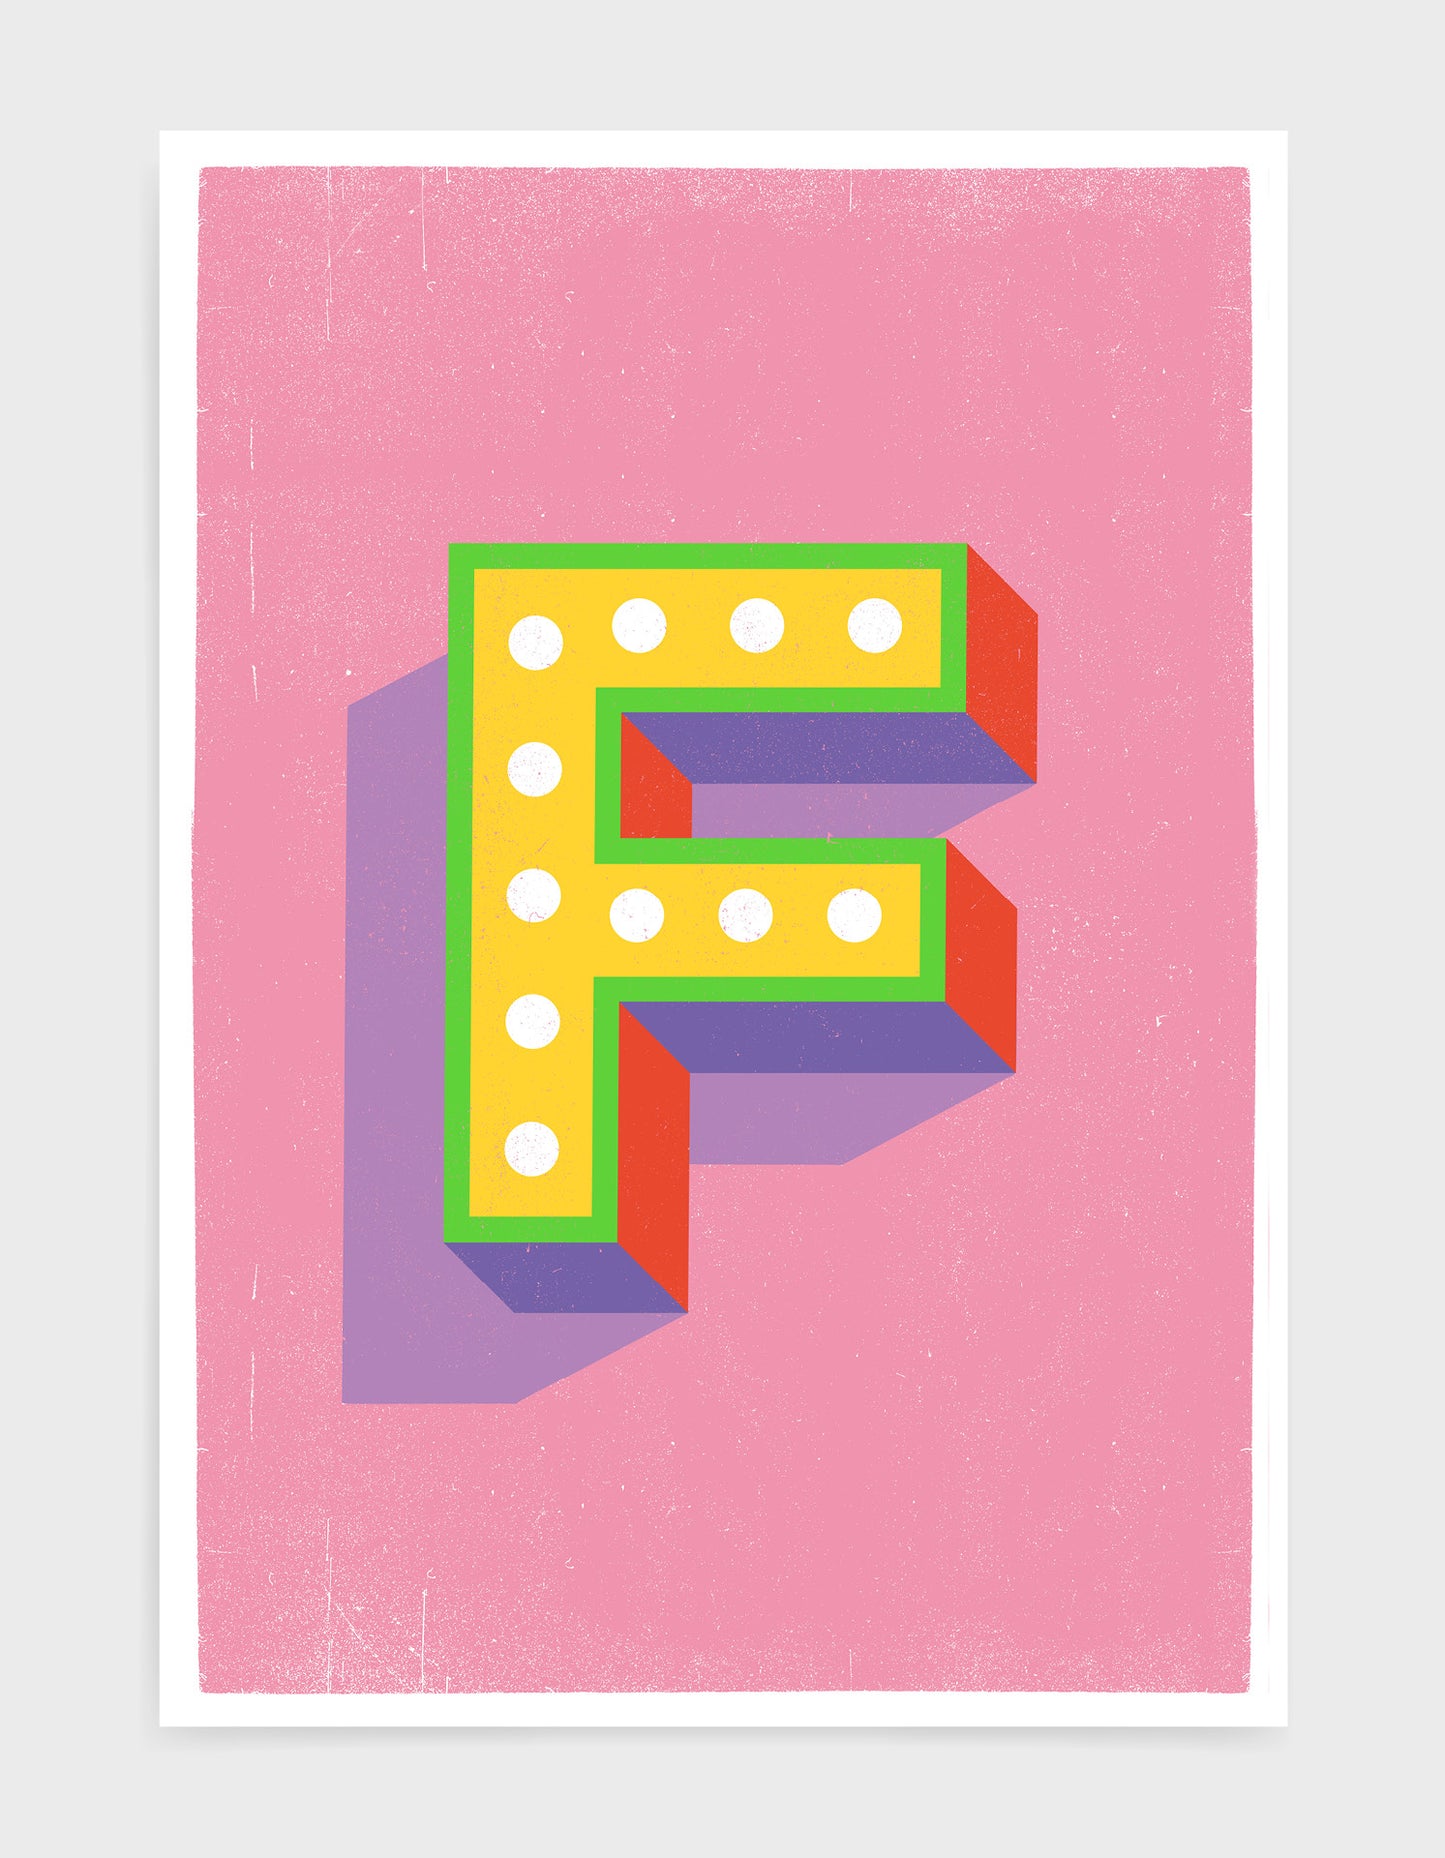 Alphabet print - lights on font in yellow against a pink background - letter f